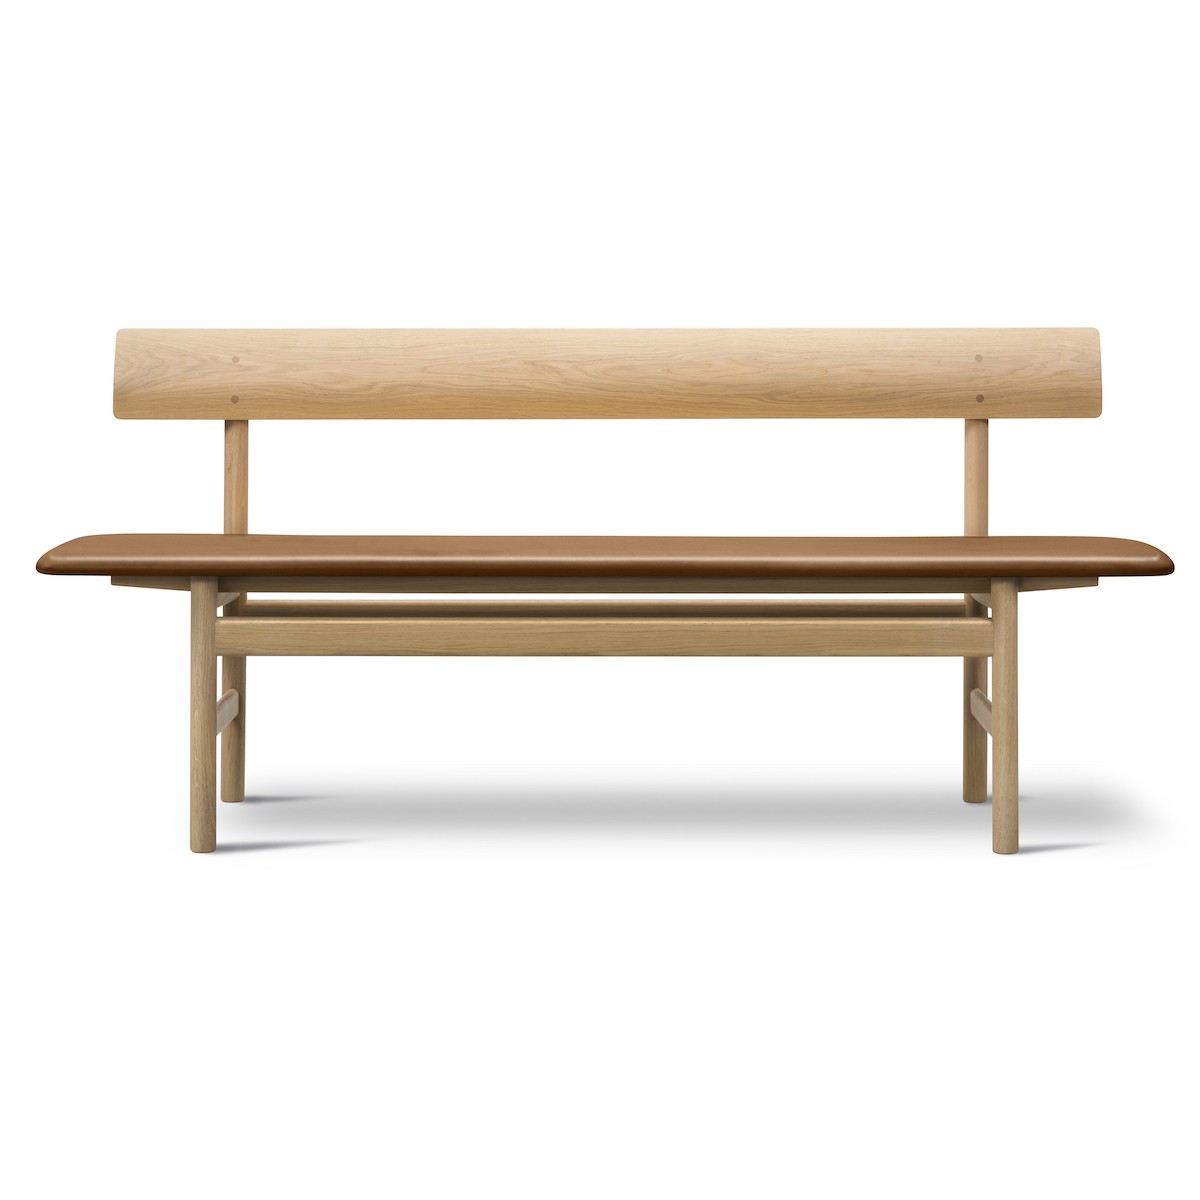 SOLD OUT Soaped oak / Max leather Cognac 95 – Mogensen Bench 3171